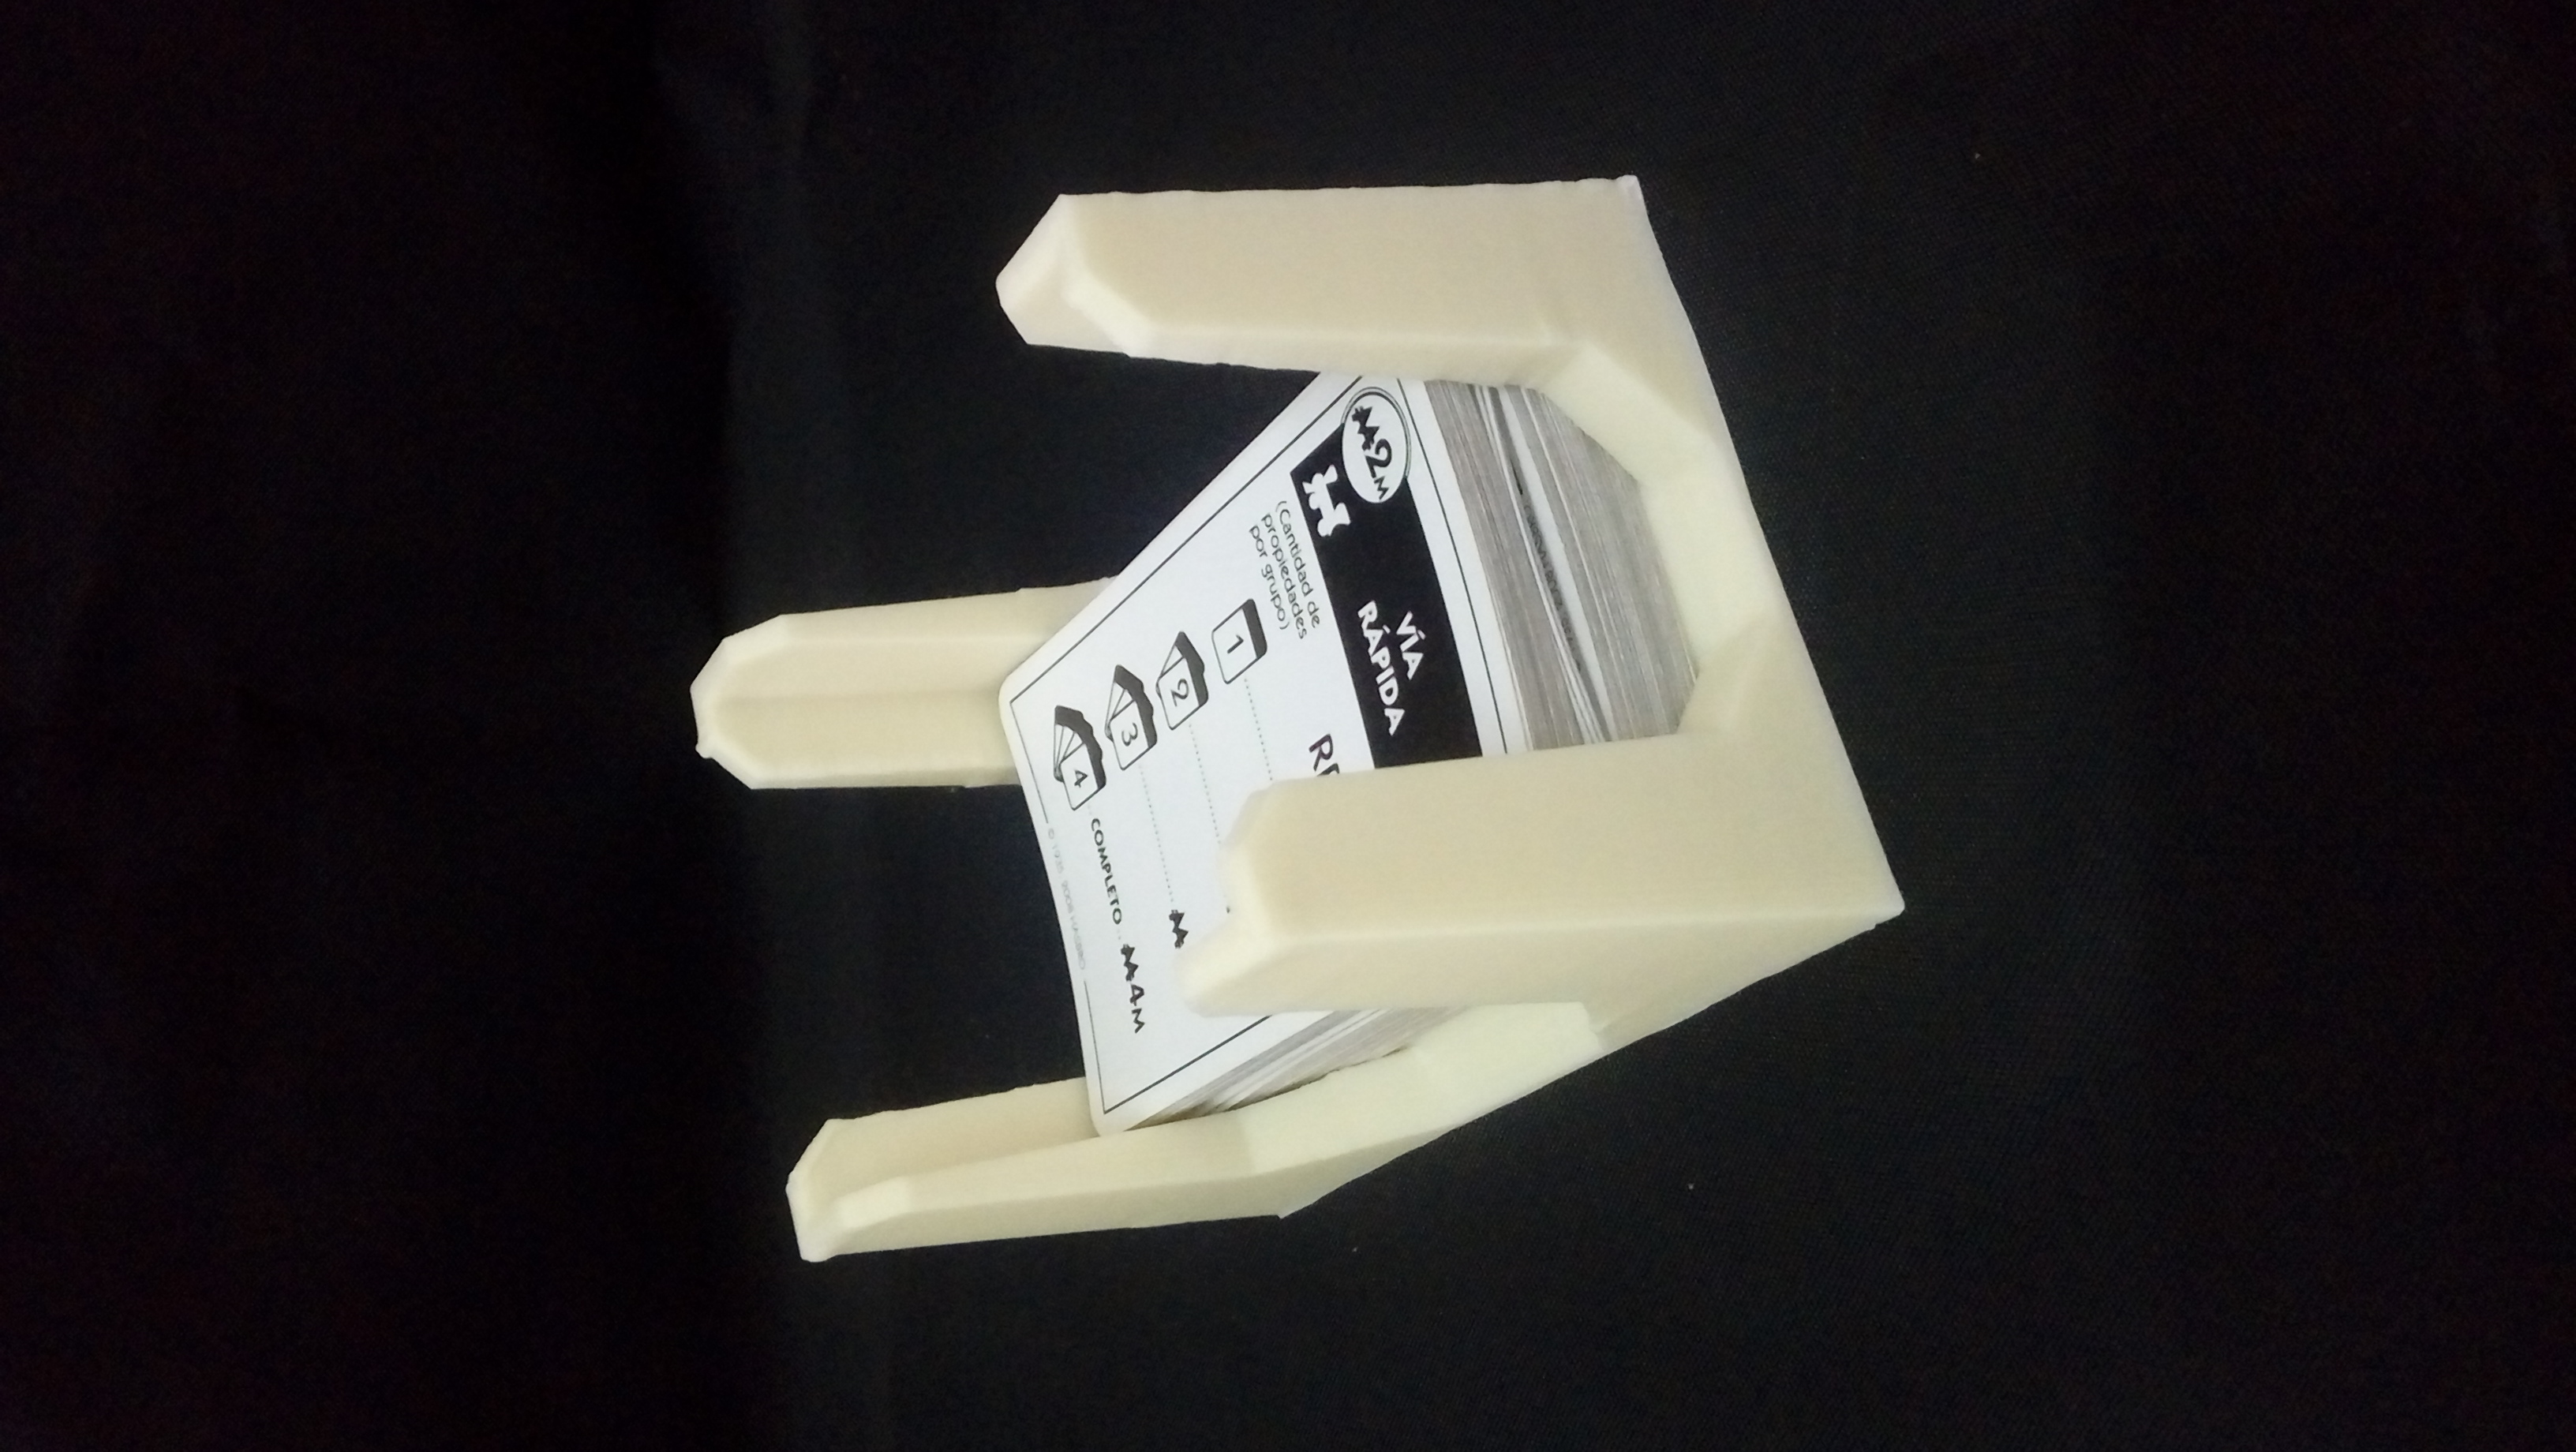 Deck Card Holder (Monopoly Card game)